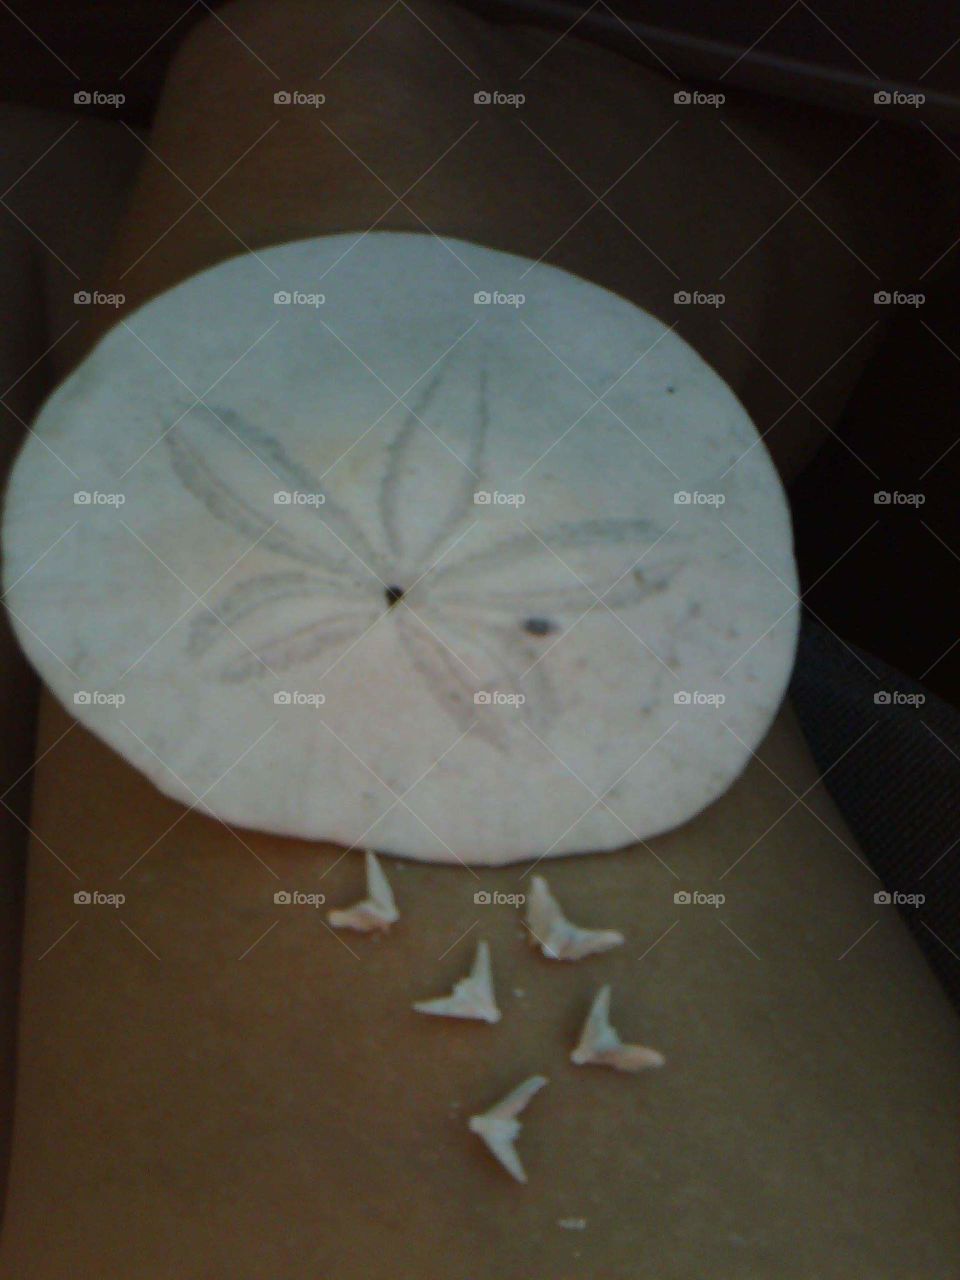 Legend of the Sand Dollar.
Of the birth and death of Jesus 
Found in the Sand Dollar shell 

If you examine closely, 
You'll see that you find here 
Four nail holes and a fifth one
Made by a Roman's Spear. 

On one side the Easter Lily, 
Its center is the star 
That appeared unto the wisemen 
And led them from afar. 
The Christmas poinsettia 
Etched on the other side 
Reminds us of His birthday 
Our Happy Christmas tide. 
Now break the center open 
And here you will release 
The five white doves awaiting
To spread Good Will and Peace. 
This simple little symbol, 
Christ left for you and me 
To help us spread his Gospel 
Through all eternity.